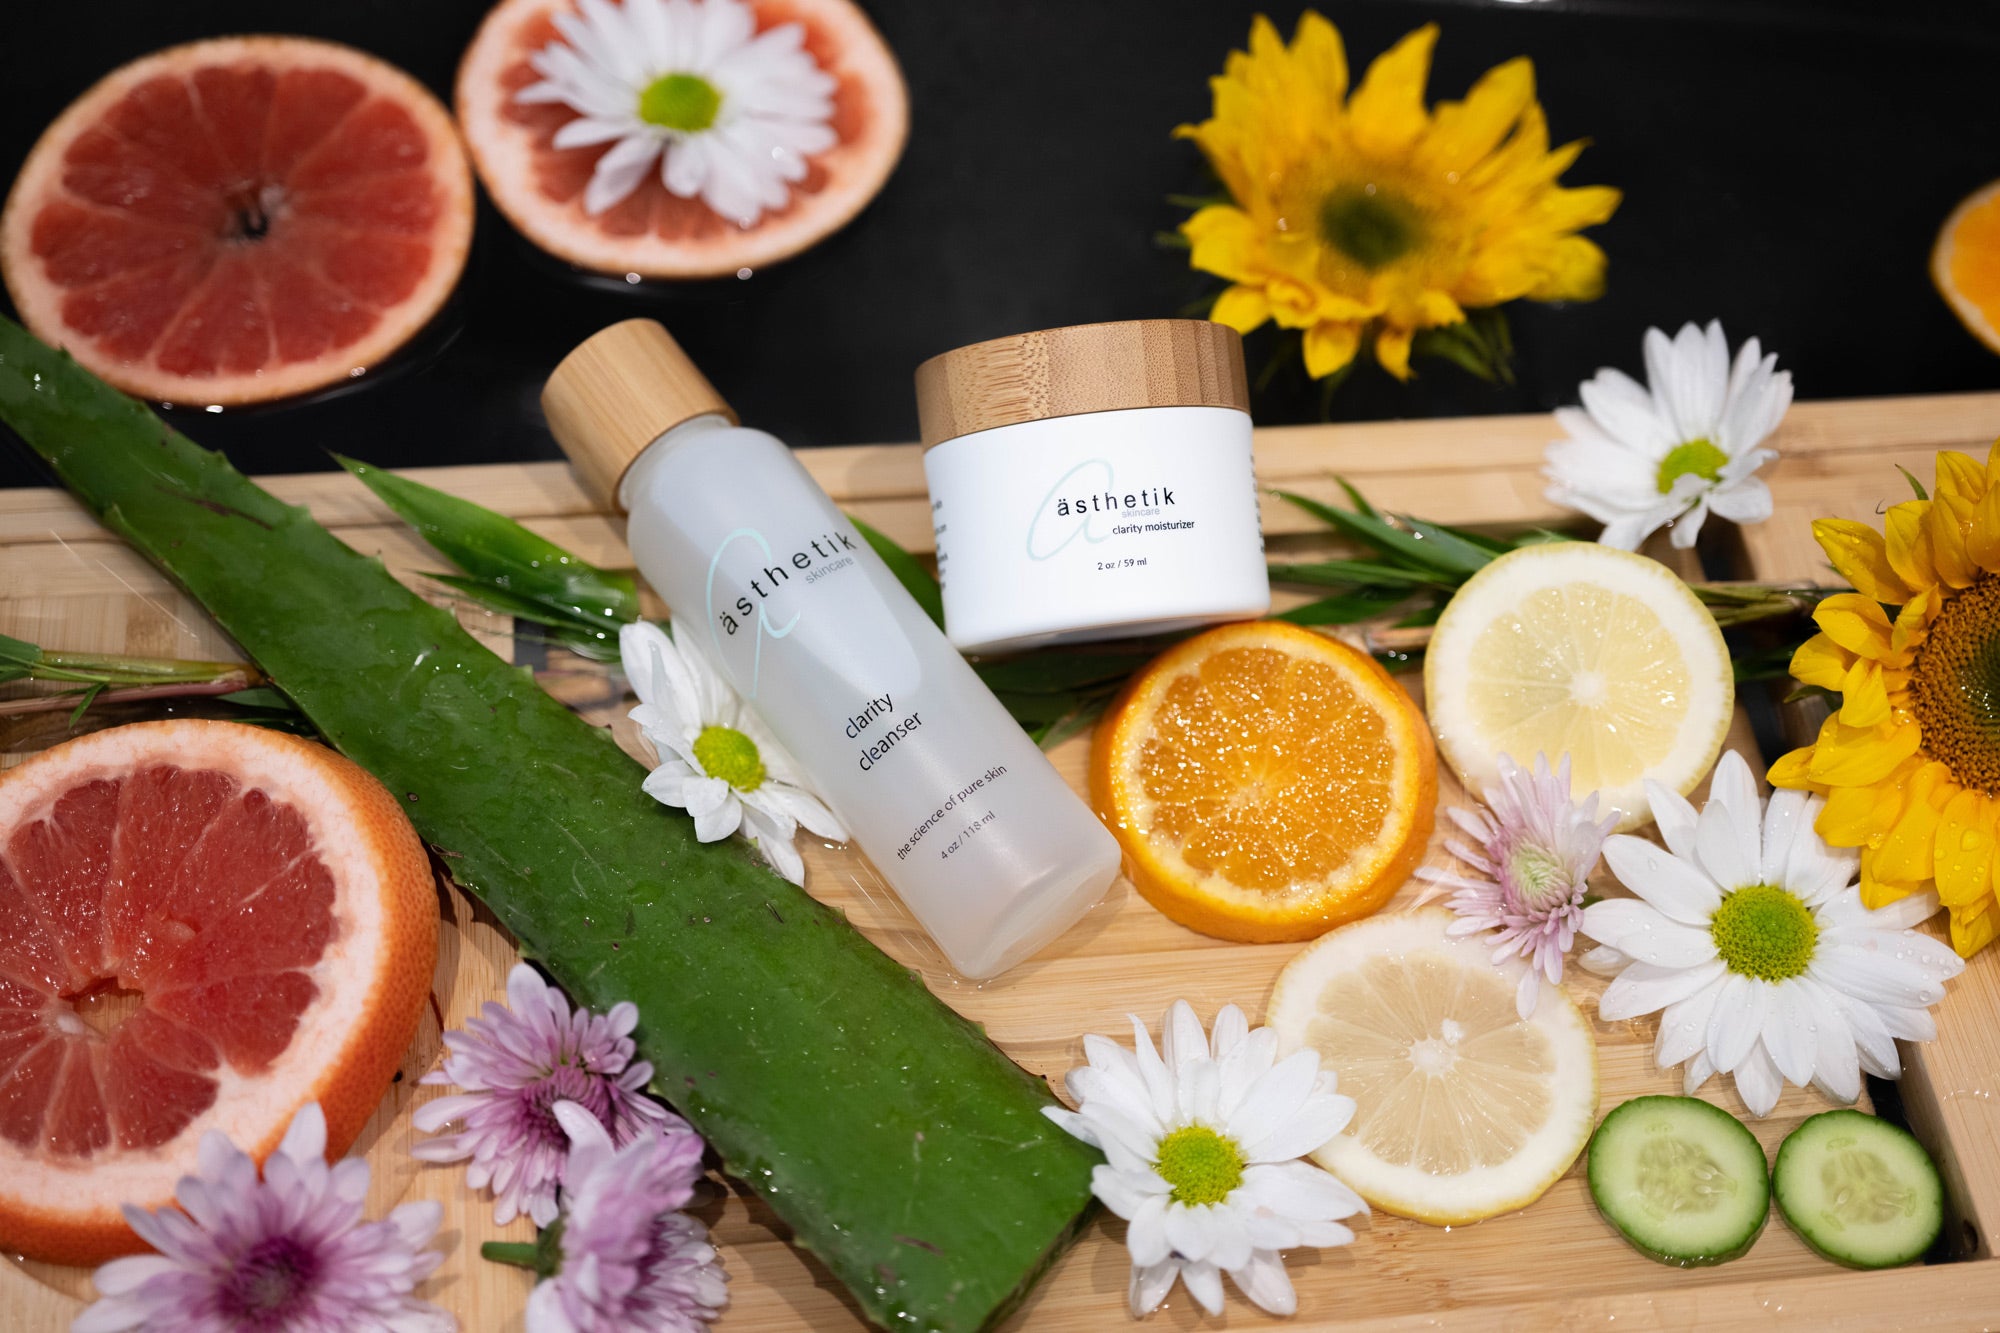 asthetik skincare clarity cleanser and clarity moisturizer on wooden tray with fruits and vegetables